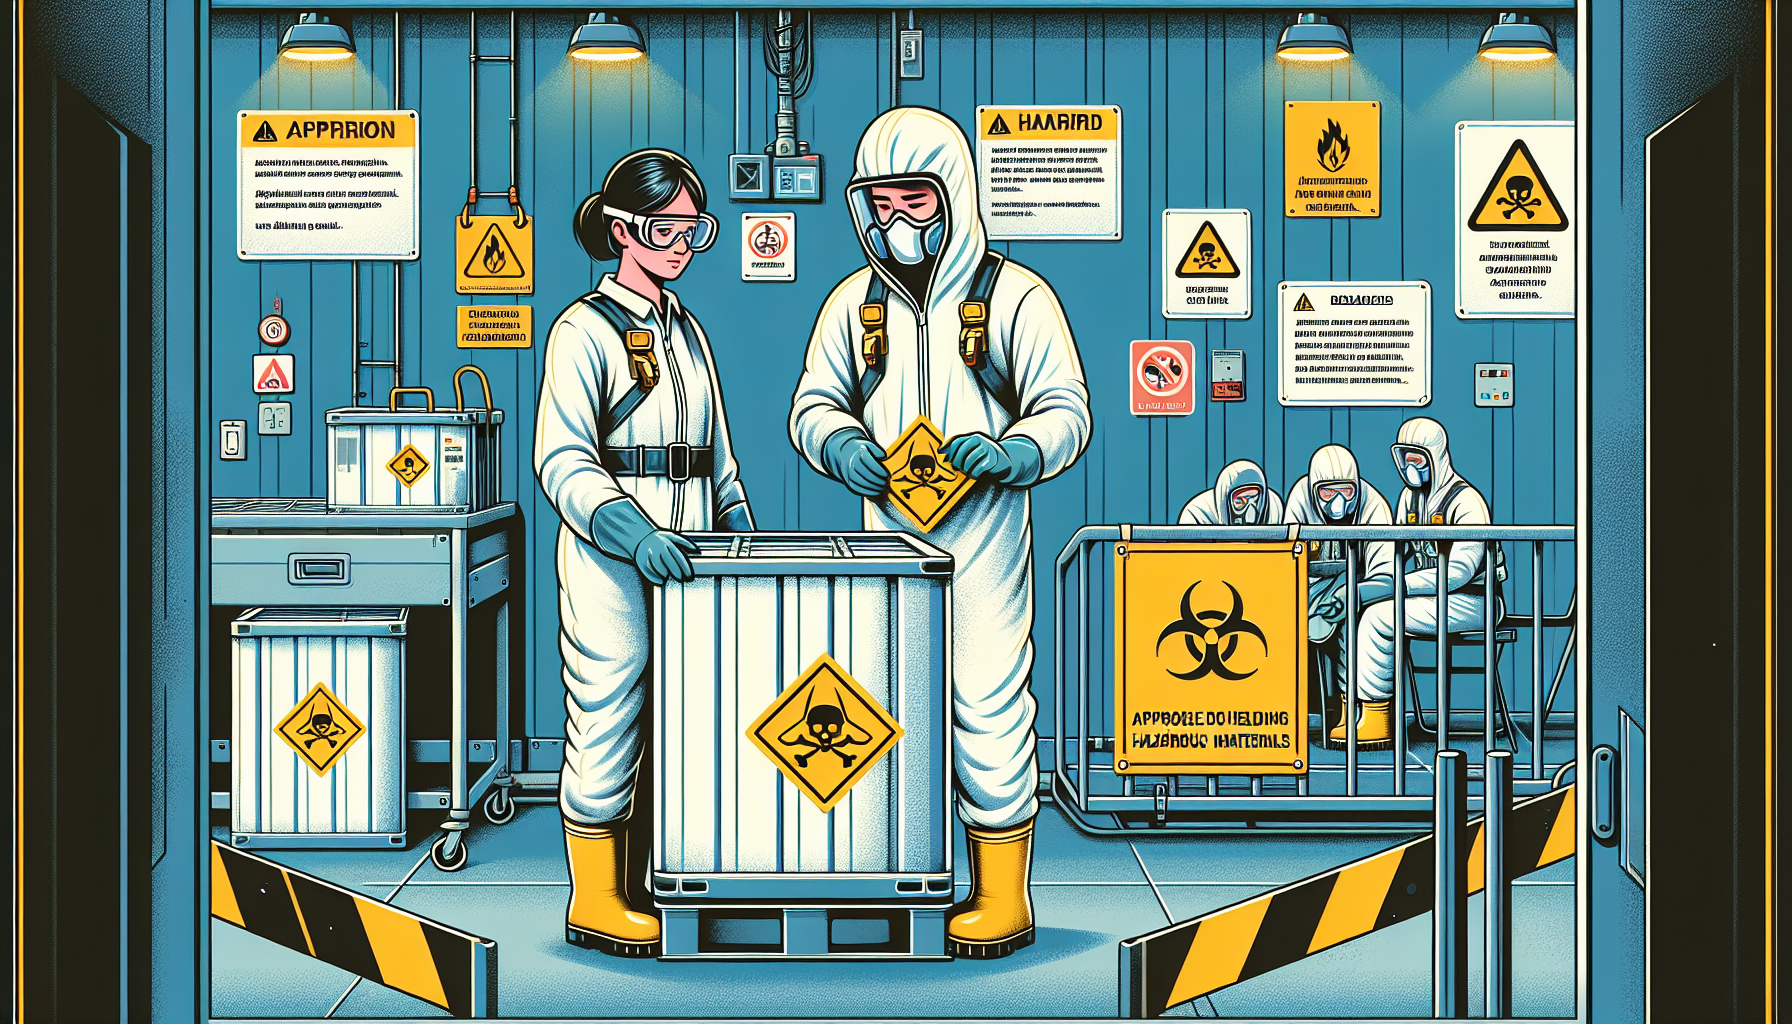 The Importance of Hazardous Material Handling and Safety